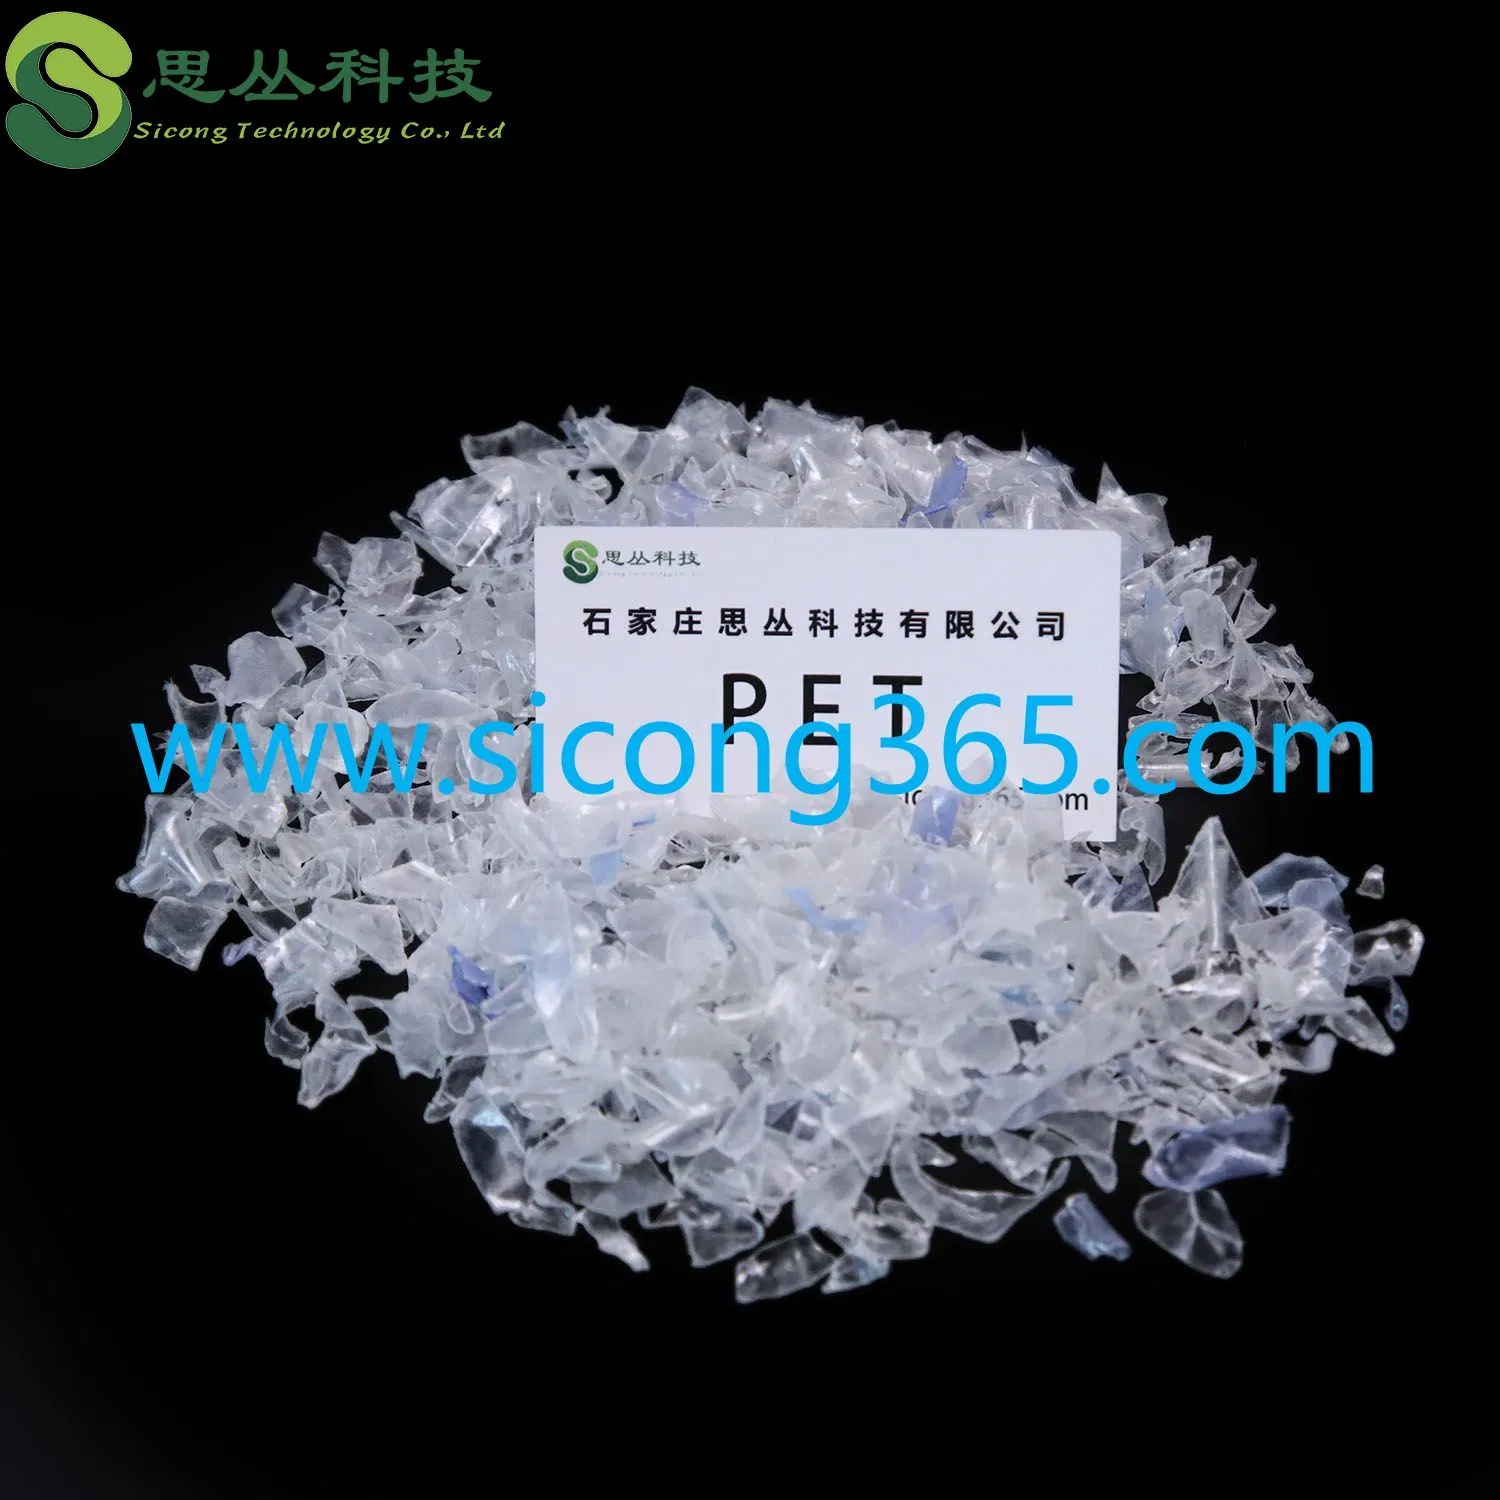 Raw Plastic Material LDPE Resin Film Grade Virgin and Recycled HDPE/LLDPE/PP/PVC/Pet/ABS Resins/ Granules